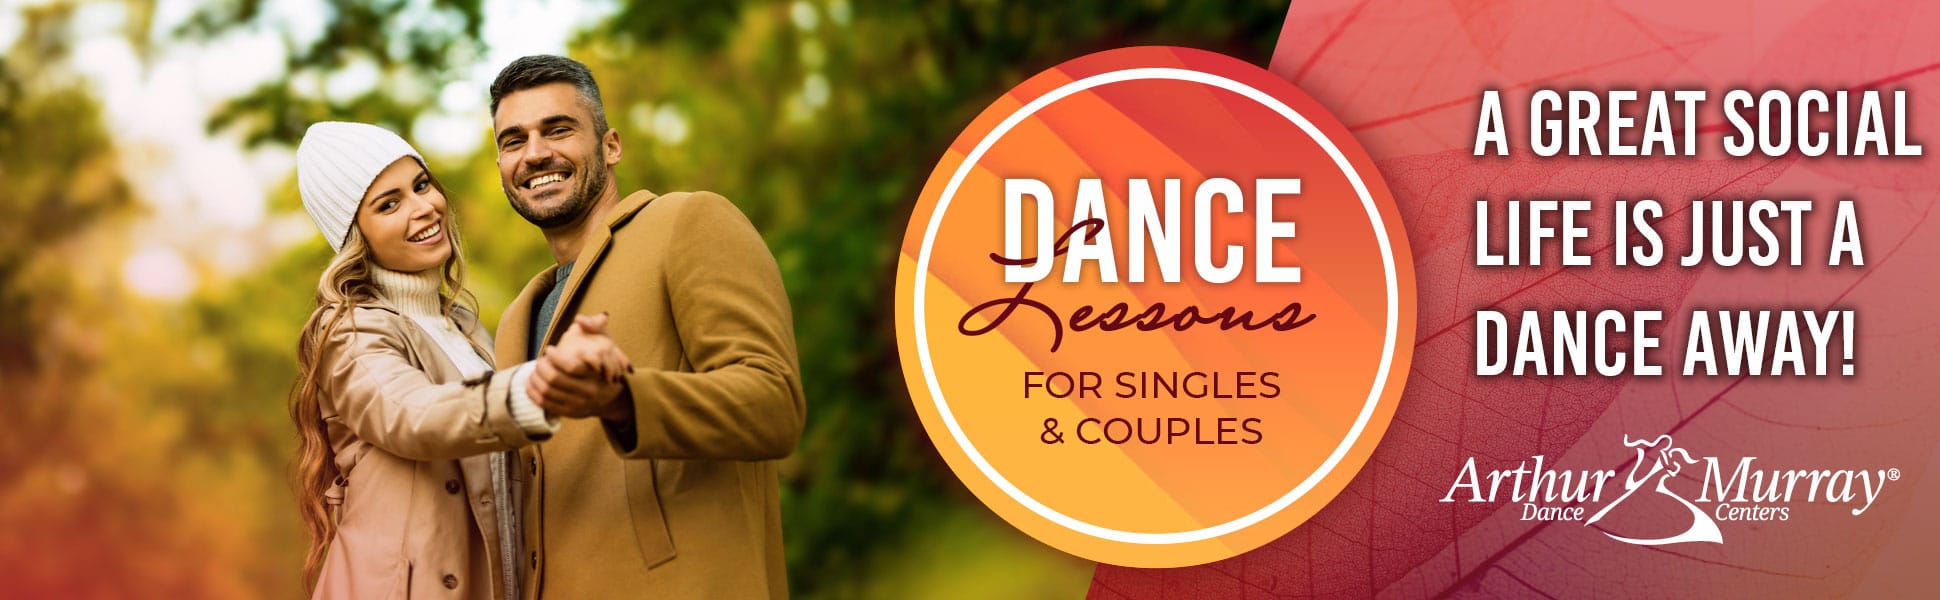 Arthur Murray Dance Special Autumn Special - Dance lessons for singles & couples